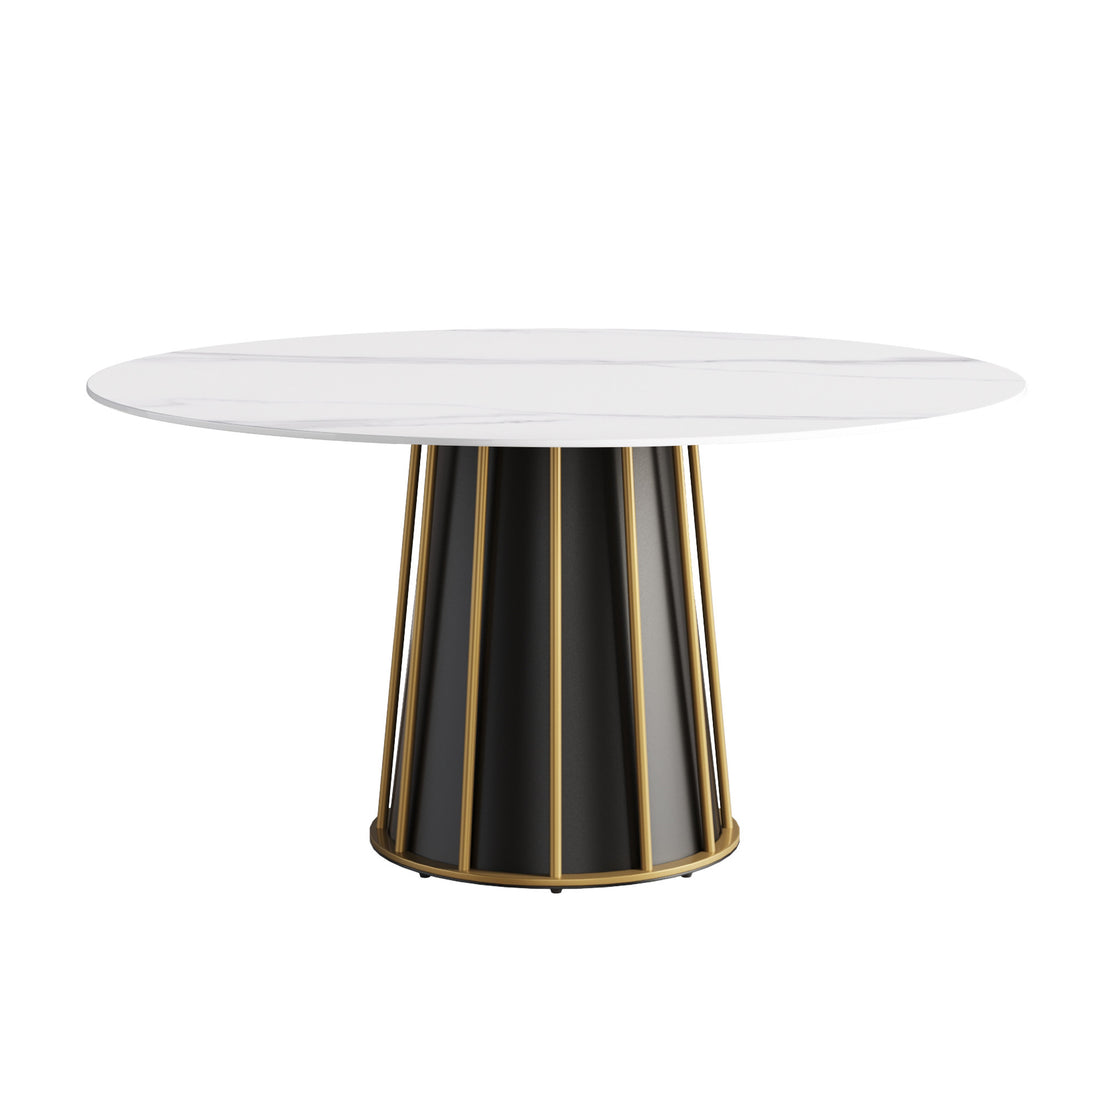 59.05 "Modern white artificial stone round dining white-dining room-plywood-sintered stone